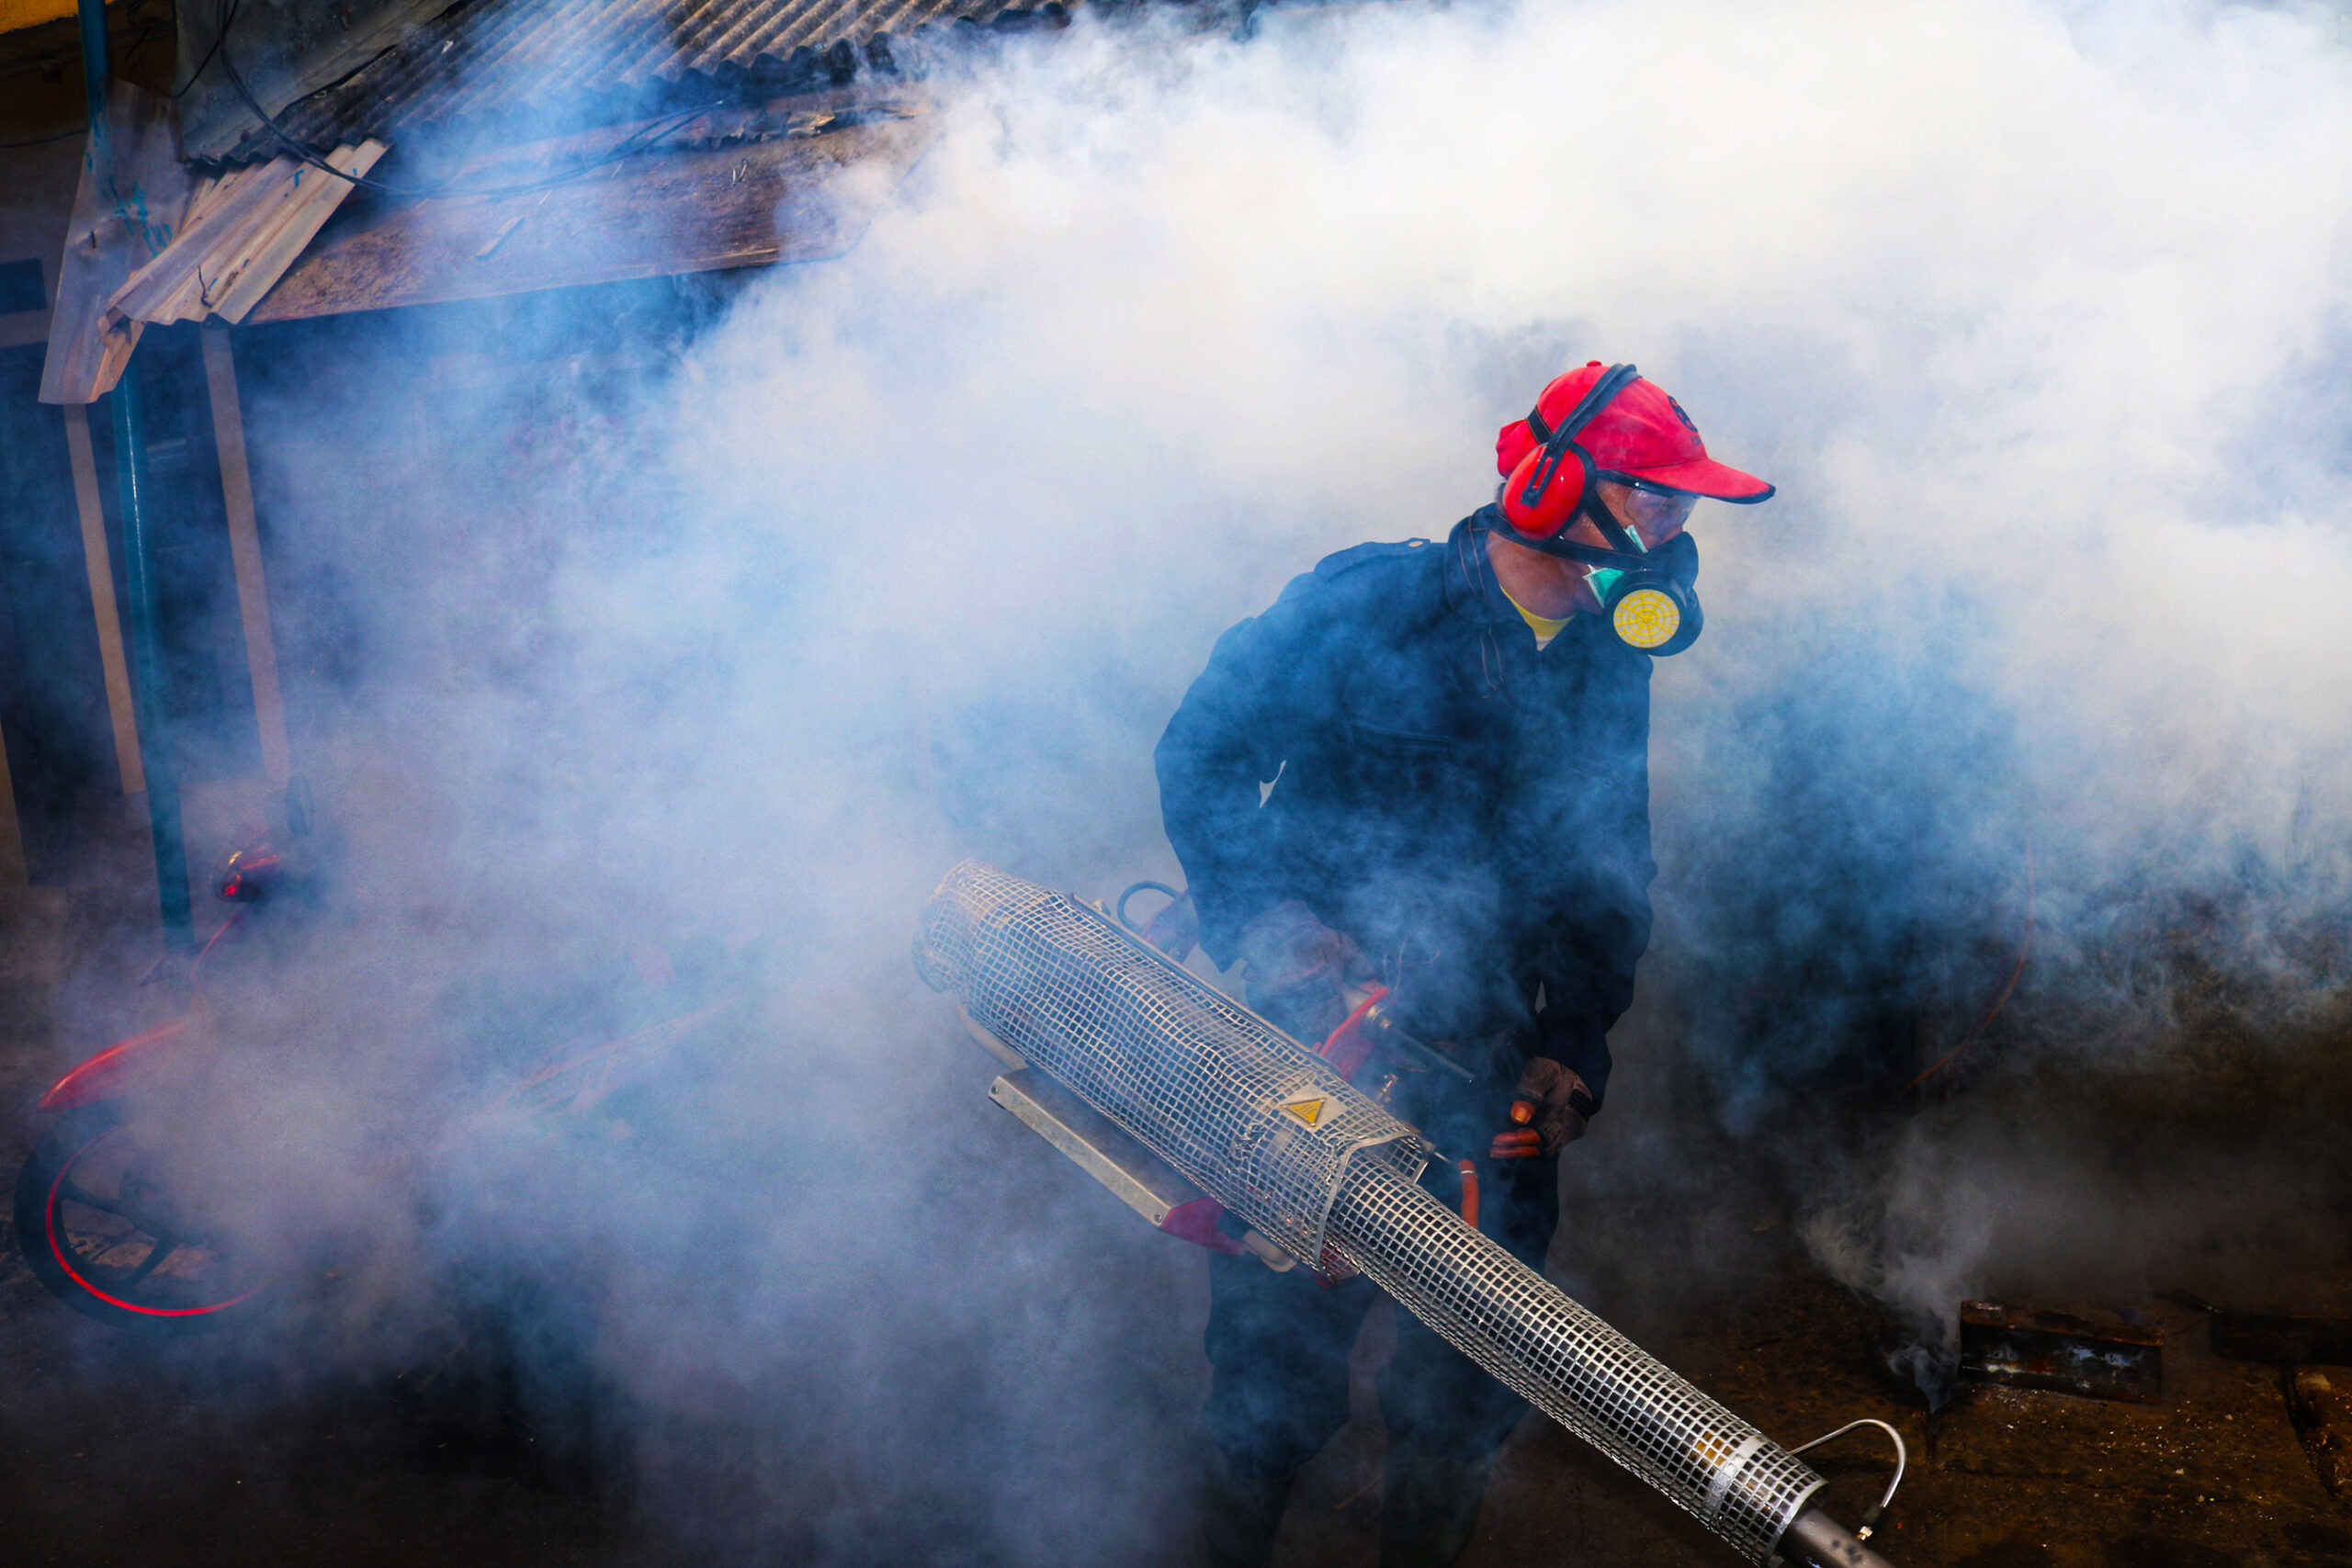 The fight back against Dengue Fever begins as UAE Health Ministry issues urgent guidance and puts Health Professionals and Hospitals on alert. Here we see the actions of troopers fighting mosquito infestations with smoke guns.